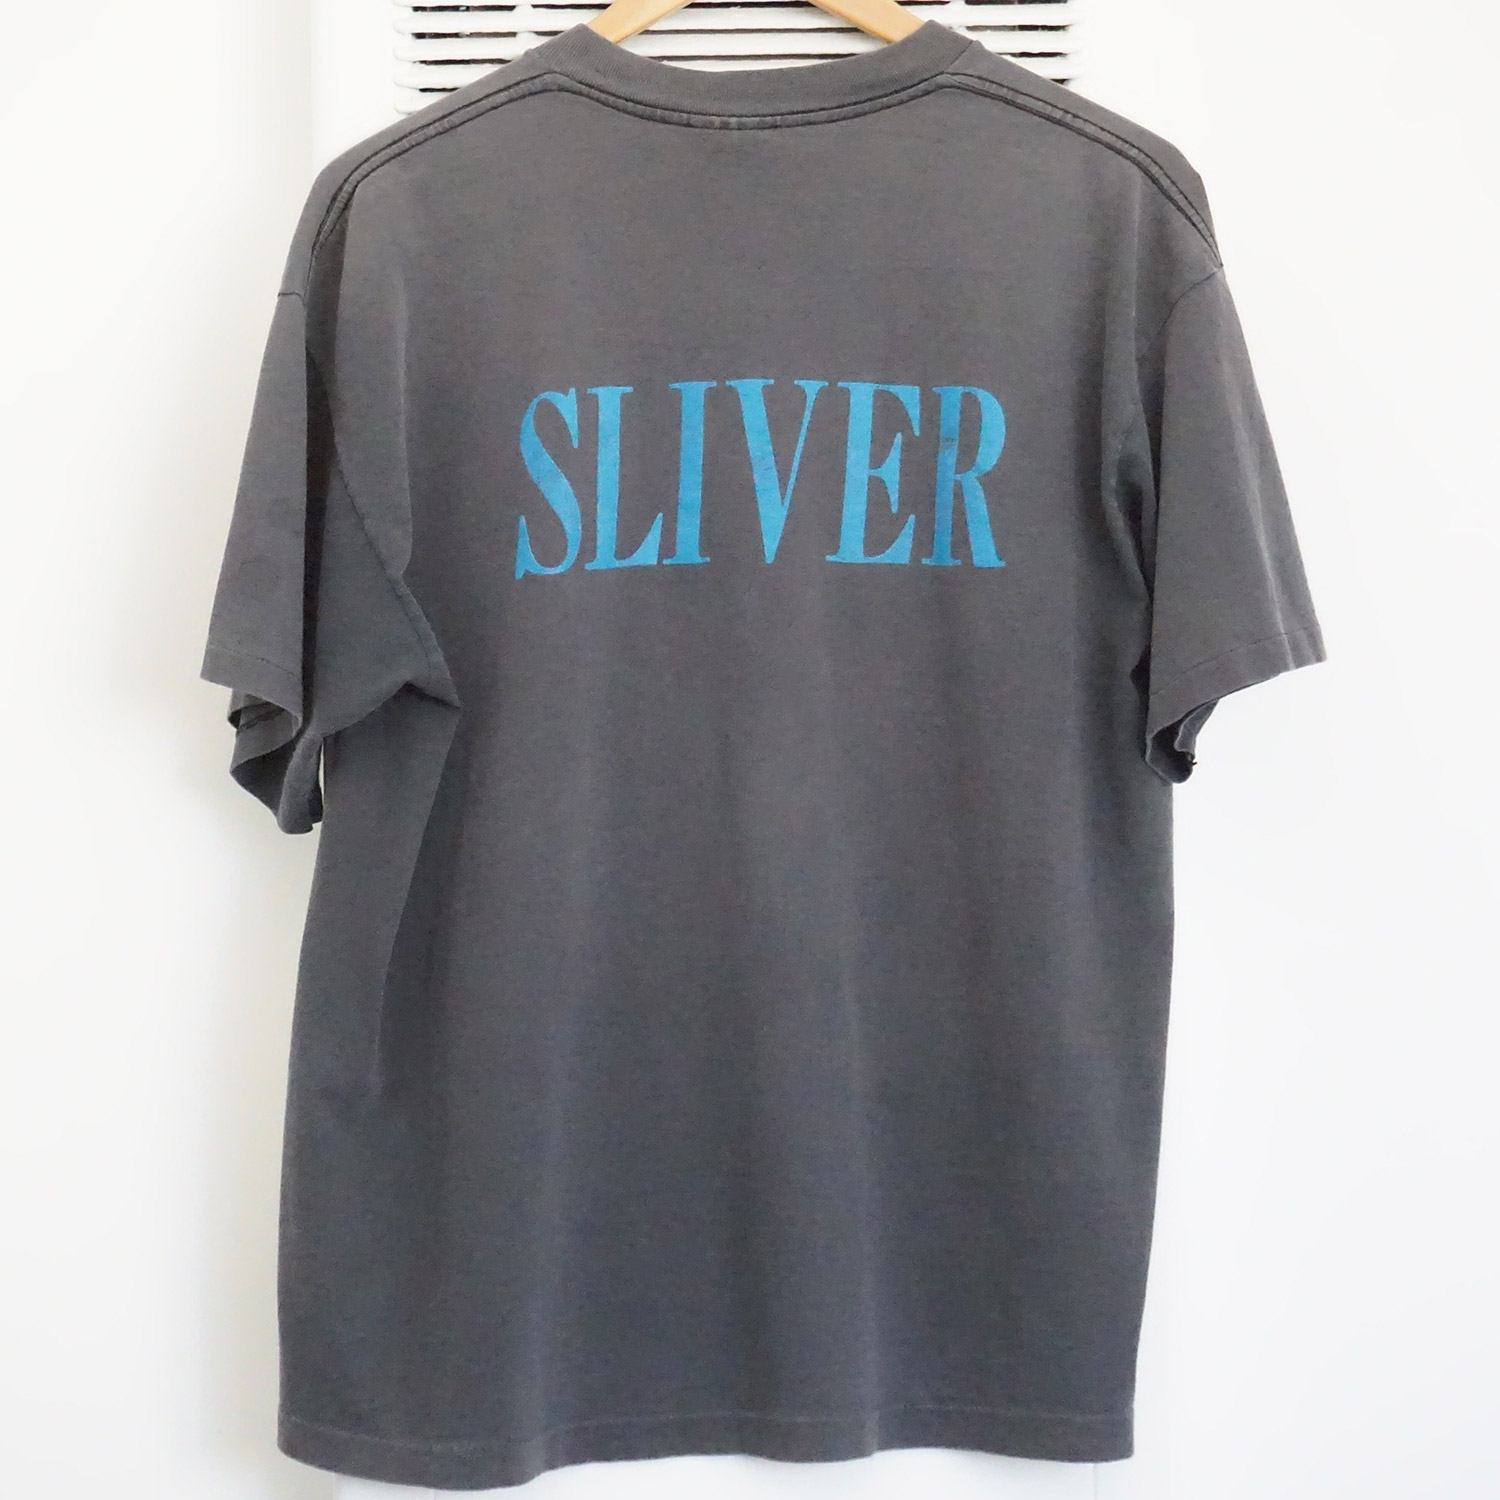 Vintage Nirvana Sliver T-shirt with Giant by Tee Jays Neck Tag, Front